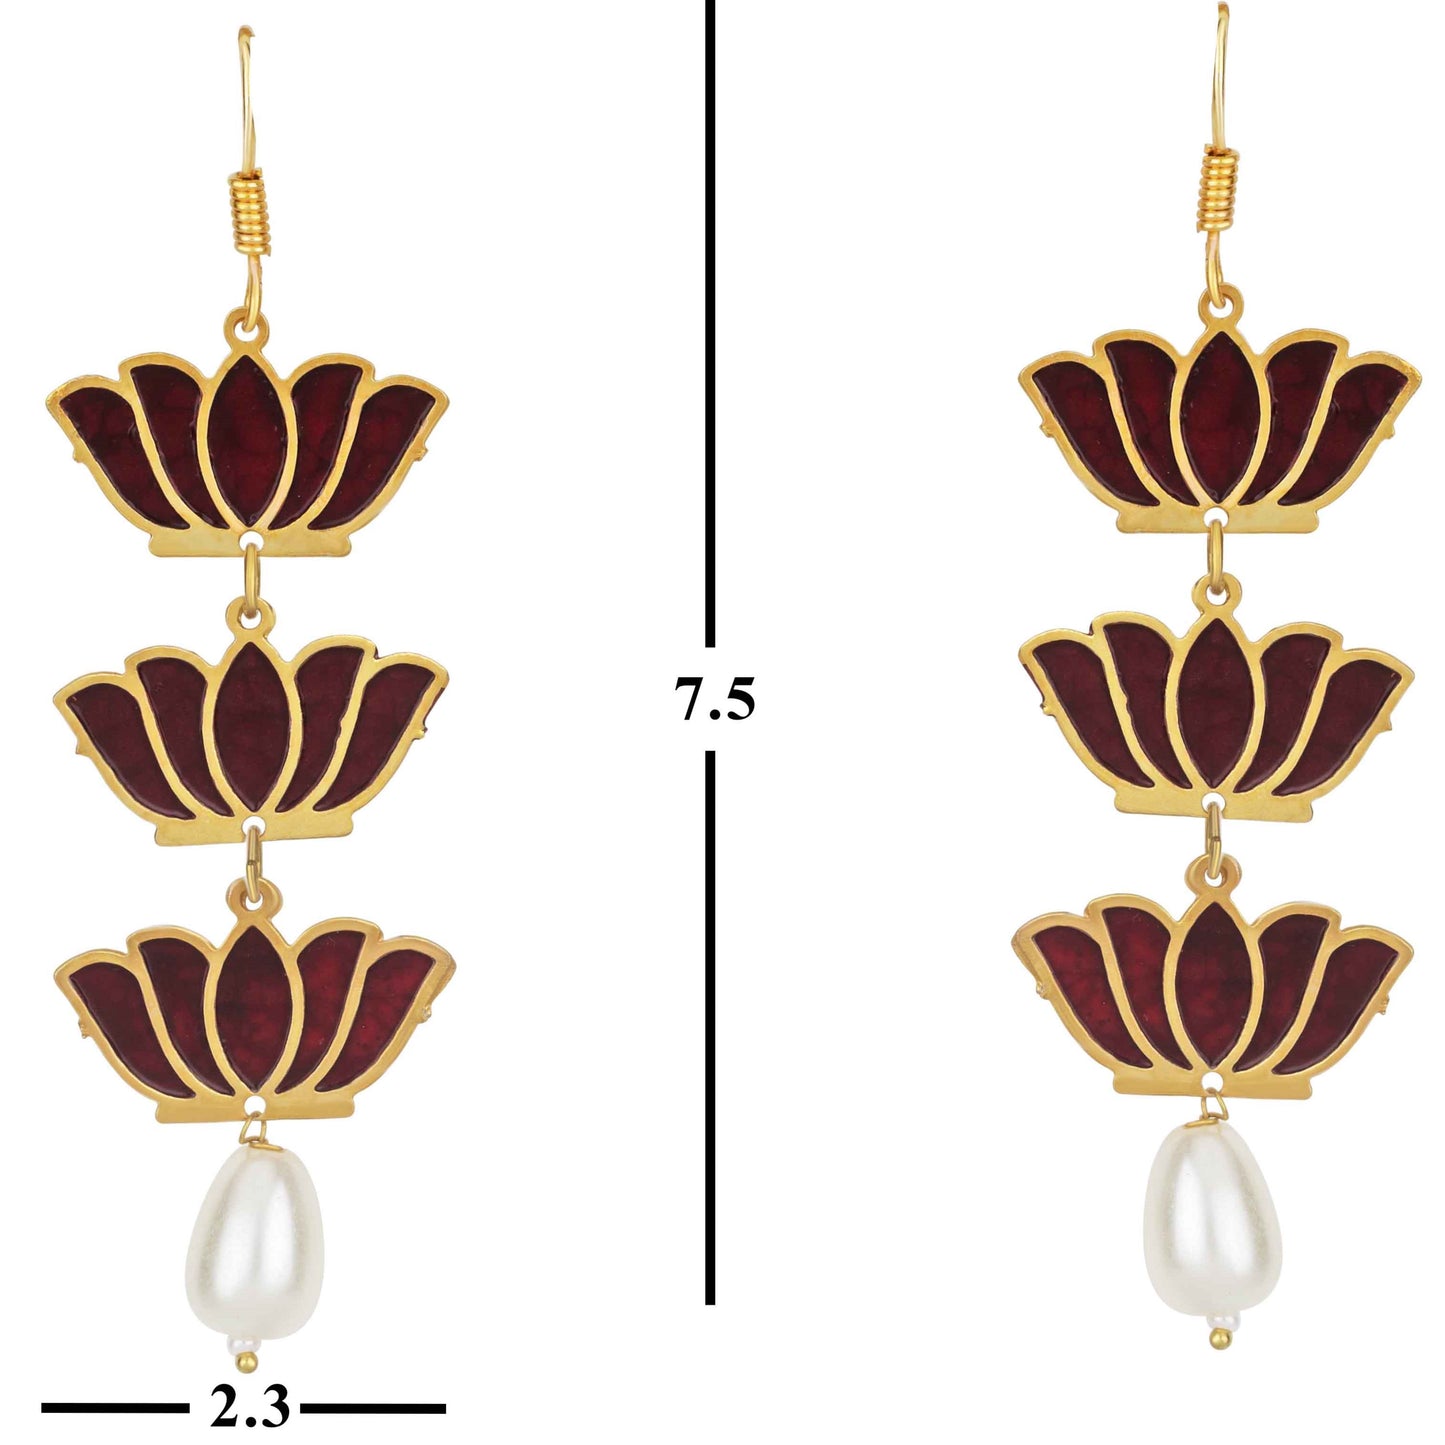 Bdiva 18K Gold Plated Light Weight Red Lotus Earrings.